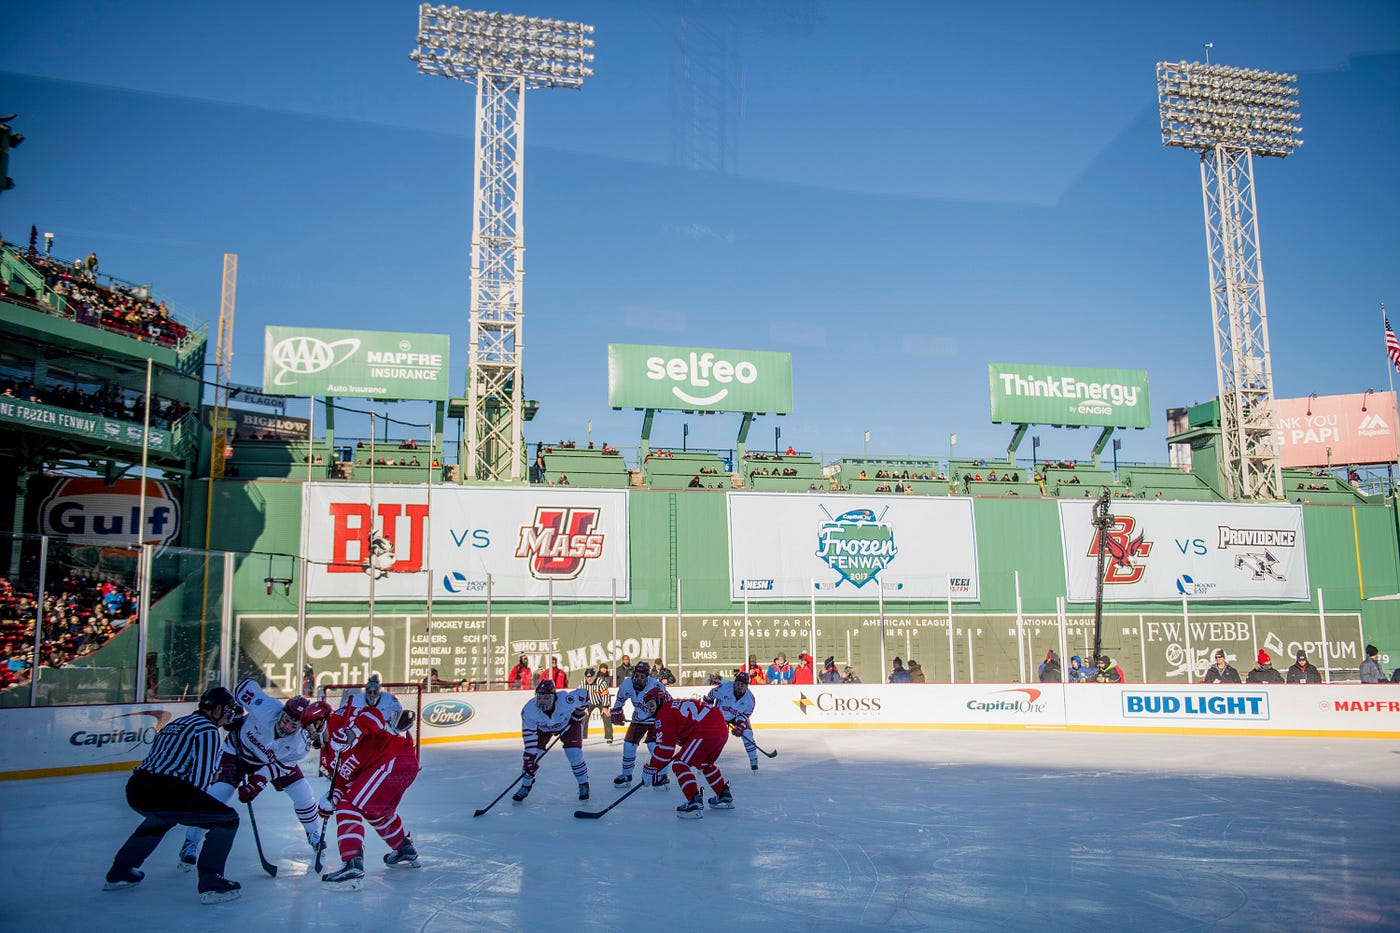 The NHL is about to move into Fenway Park. Here's a look at how it